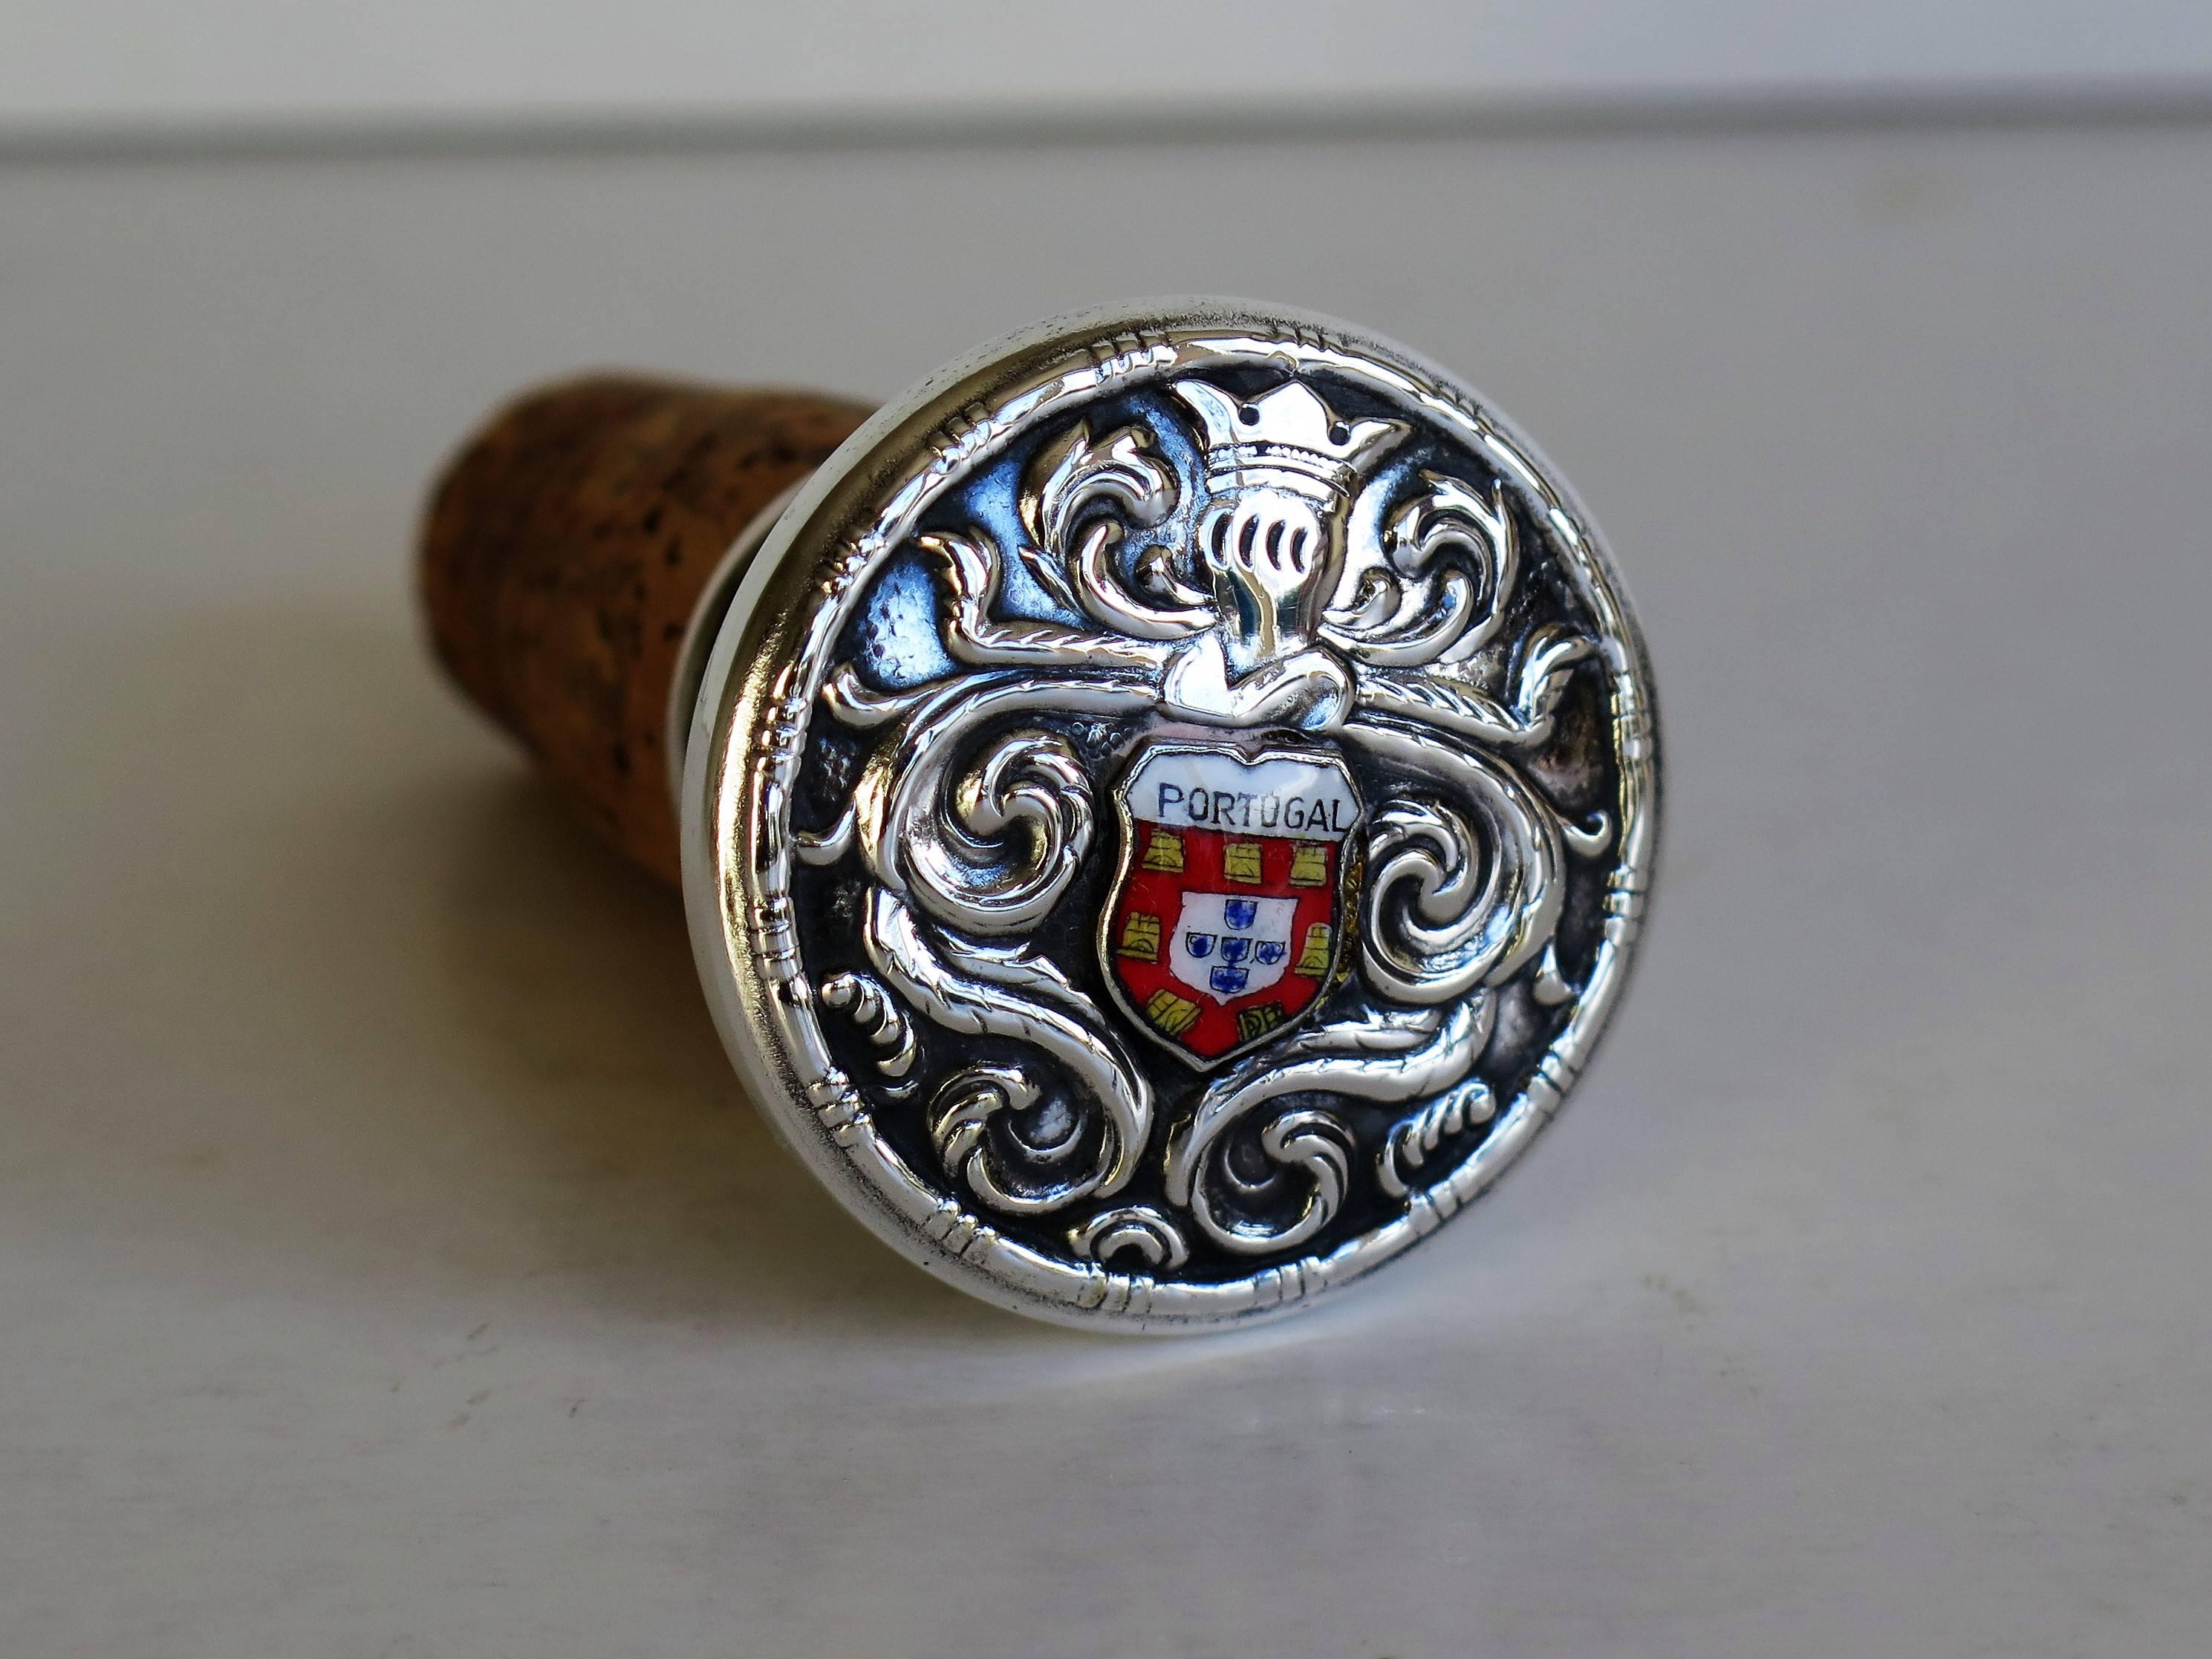 Portuguese Silver Wine Bottle Stopper with Portugal Coat of Arms and Cork Stopper